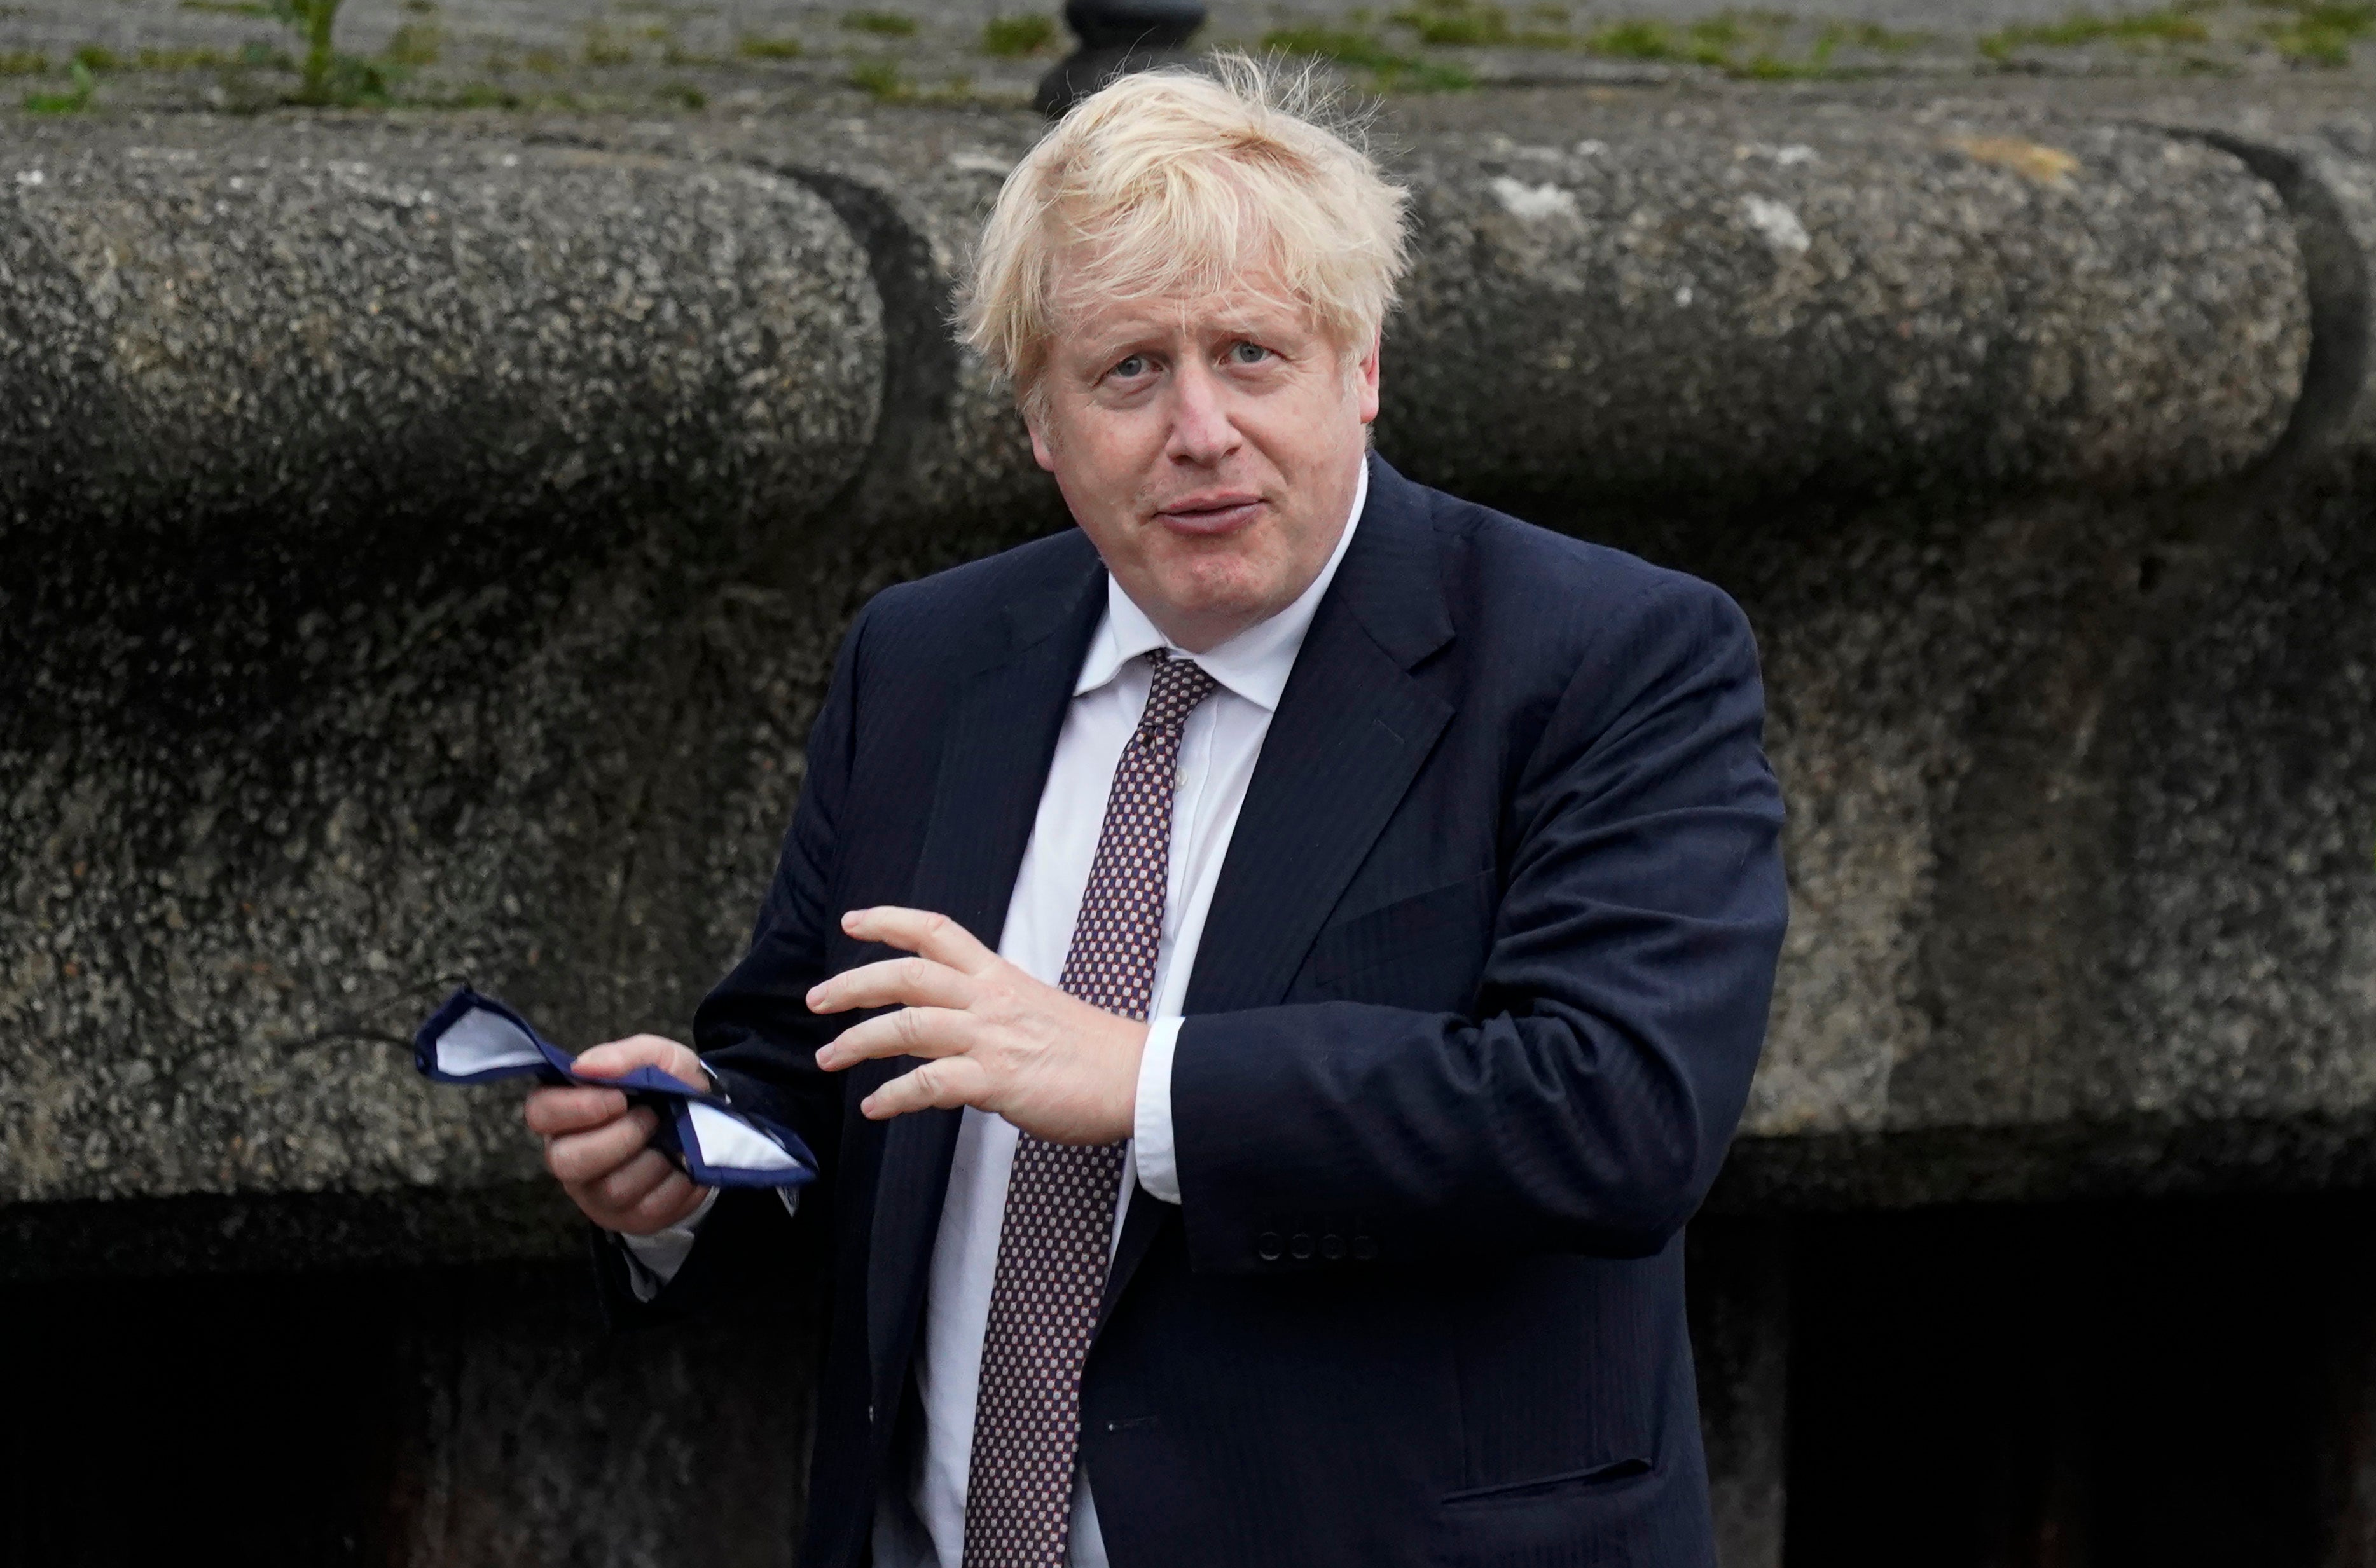 Boris Johnson has his work cut out for him in Cornwall